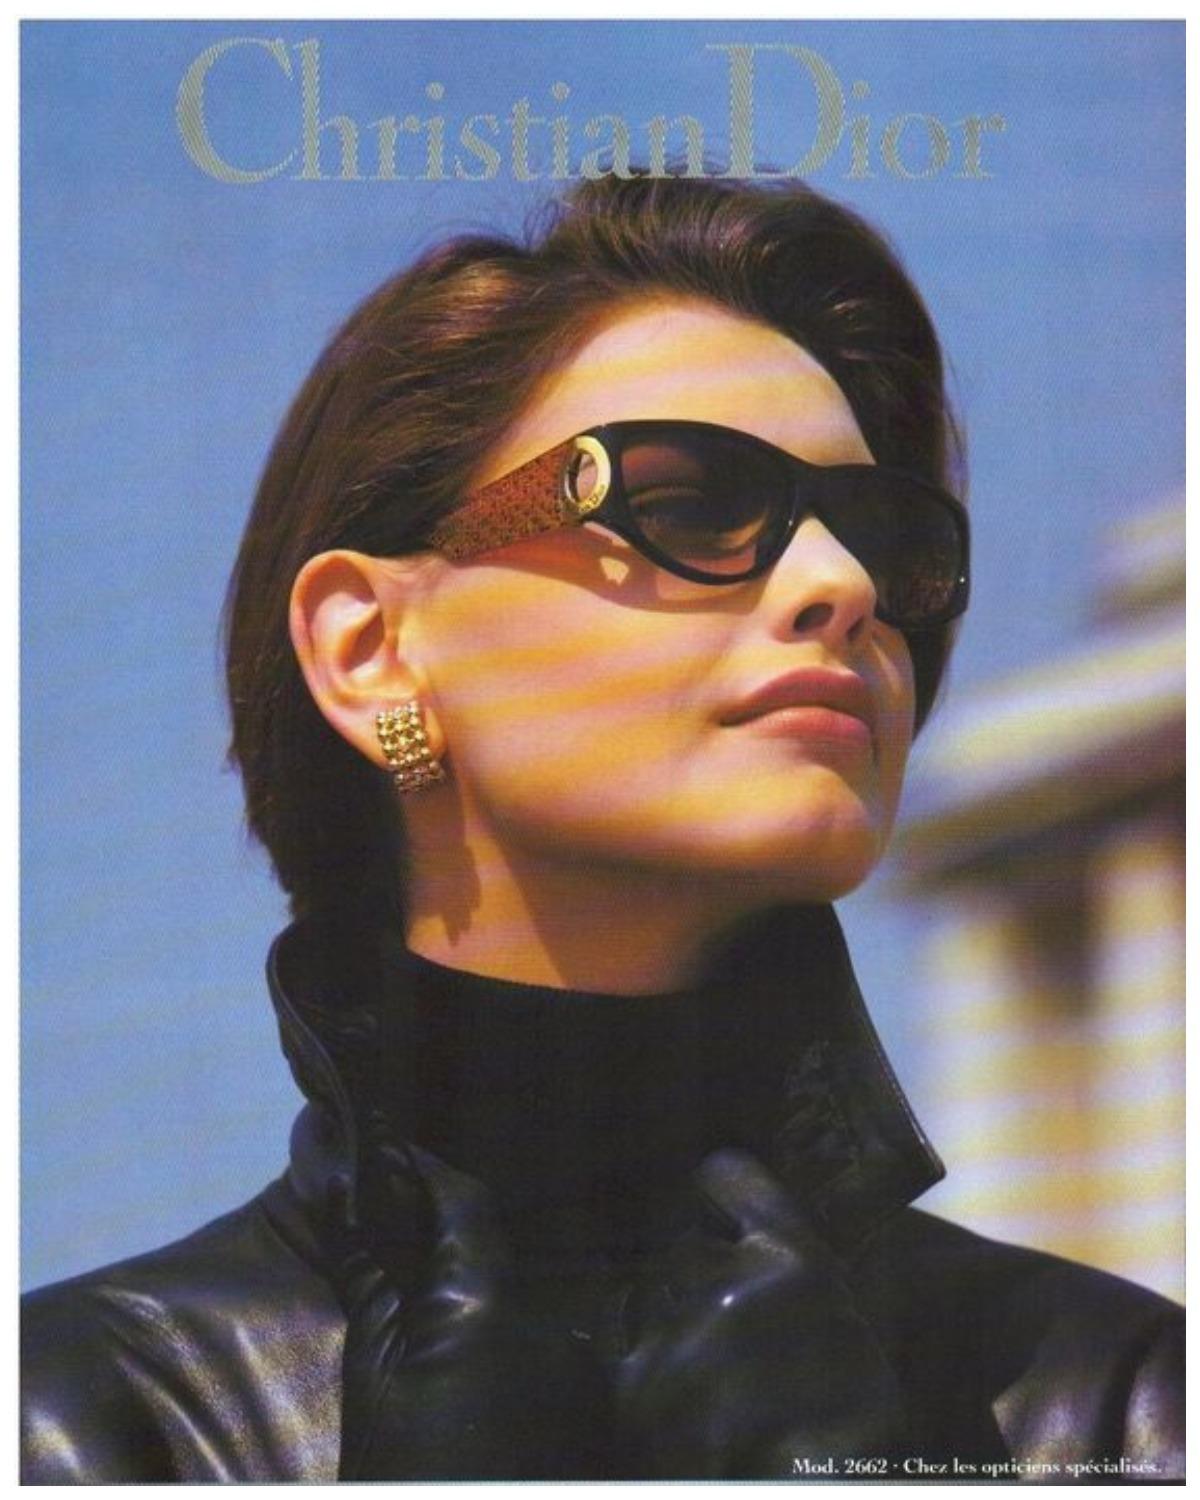 Christian Dior Black and Gold Houndstooth Sunglasses
Collection: Christian Dior 1992
Gianfranco Ferré for Dior
Christian Dior style: Sunglasses 2662
Country of production: Germany
Material: Optyl
Color : 90 Black / Orange / Gold
We all have John